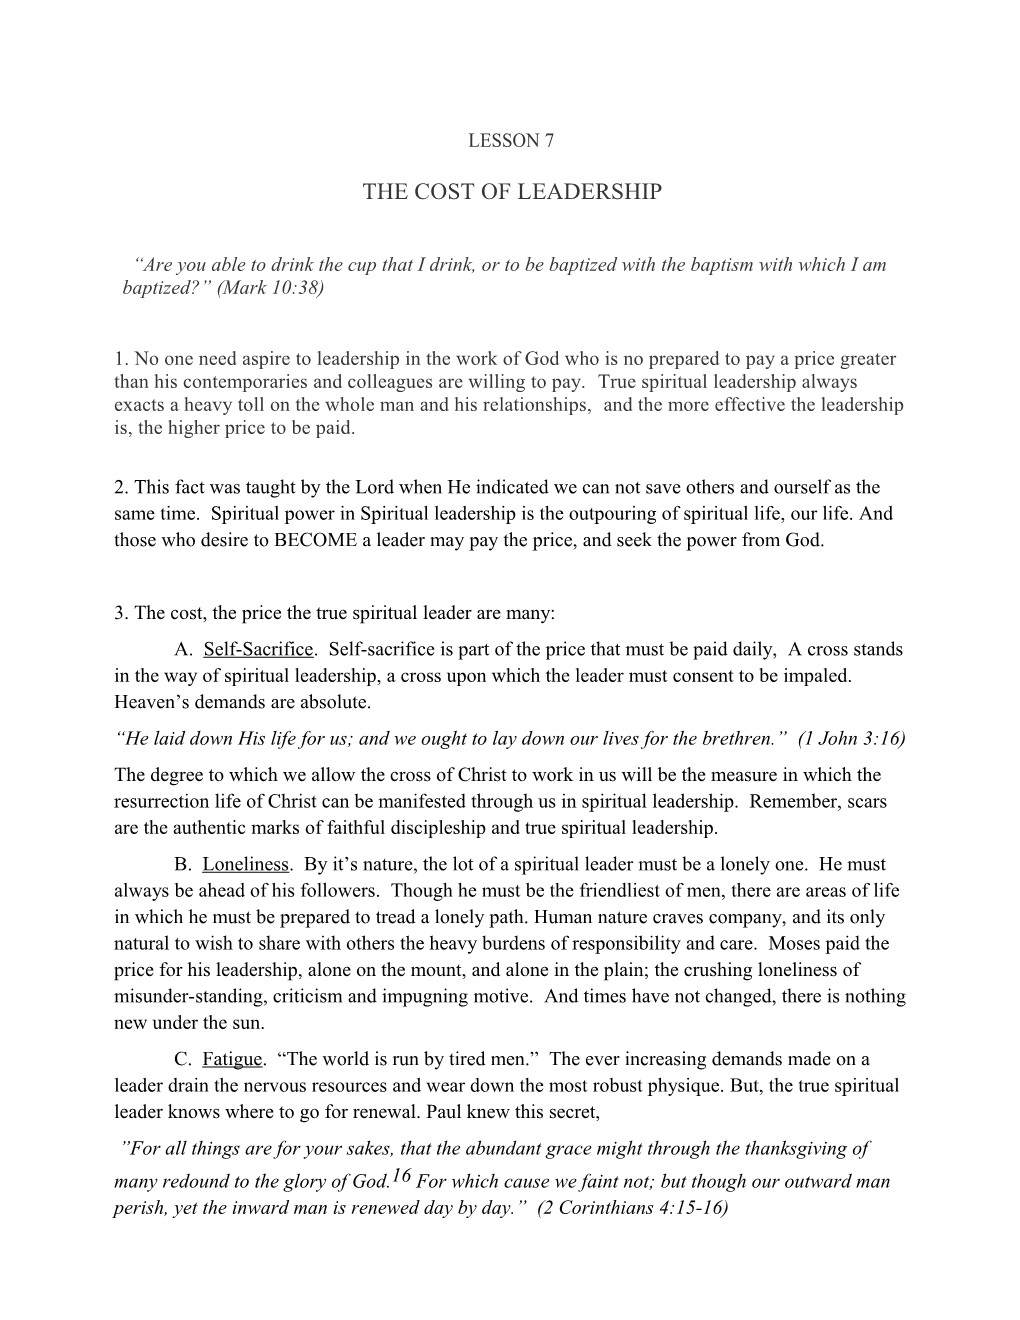 The Cost of Leadership